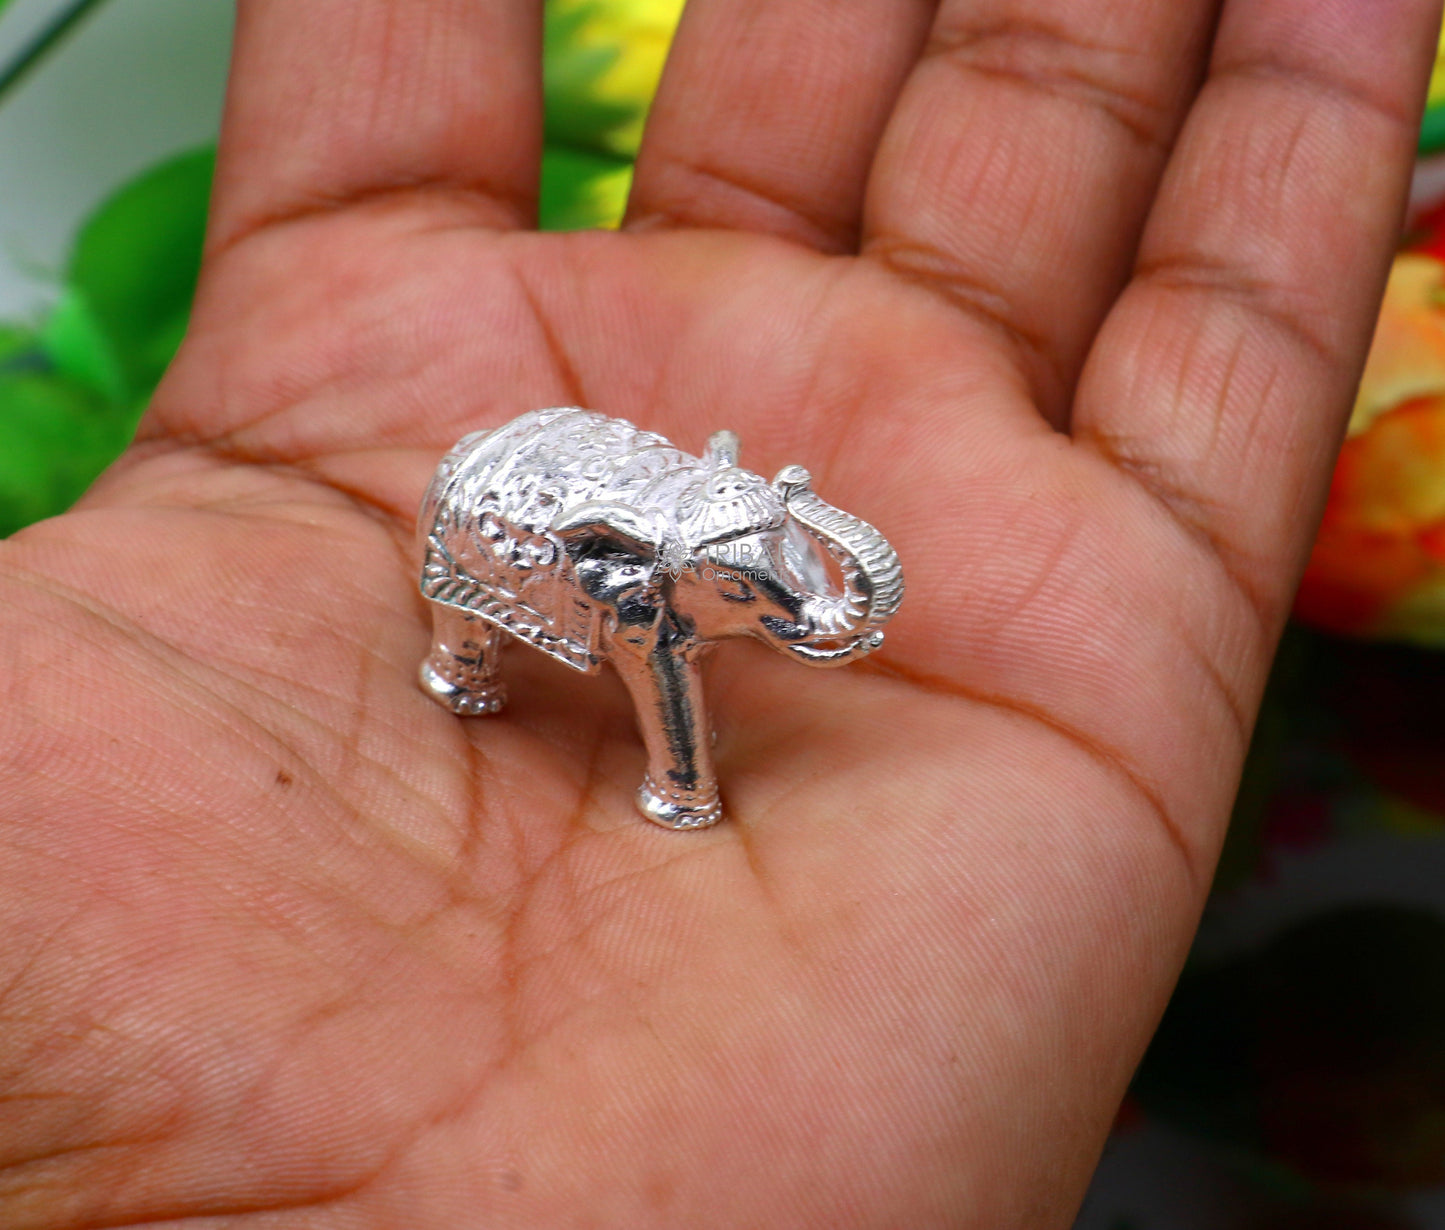 Fully solid 925 Sterling silver Elephant statue/ figurine sculpture, best gifting or puja article figurine for wealth and prosperity art607 - TRIBAL ORNAMENTS